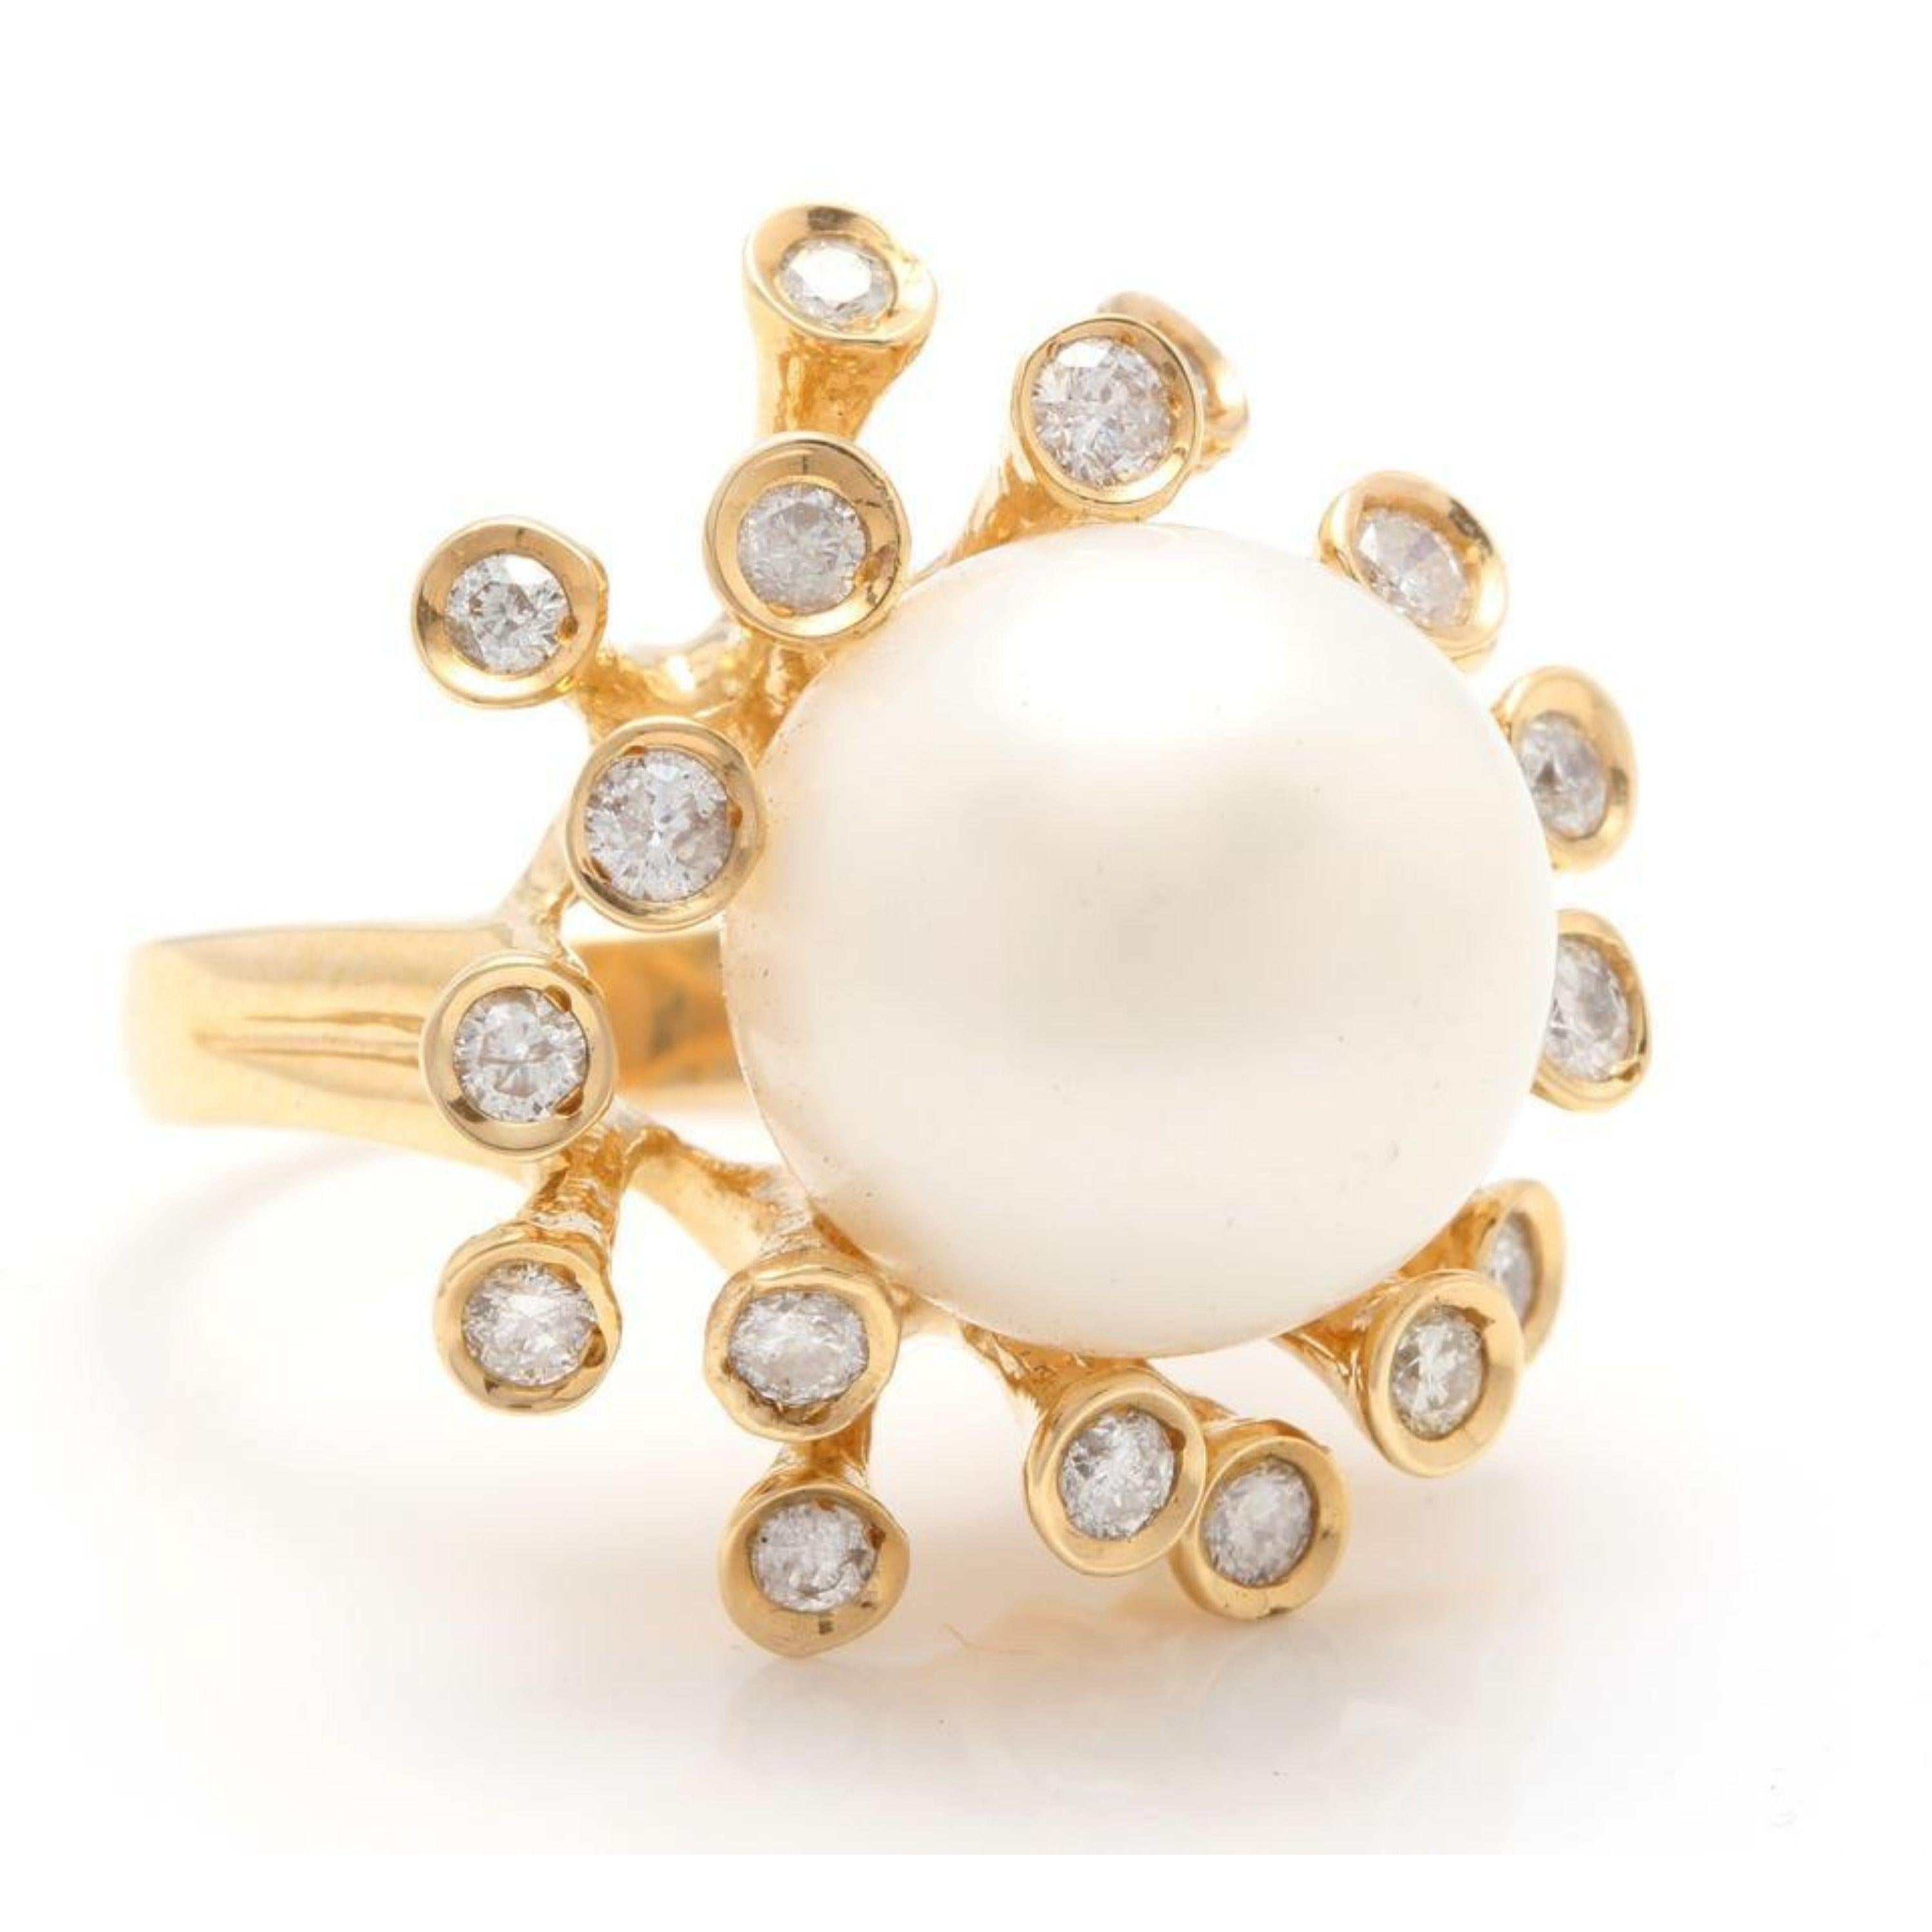 Splendid Natural 15mm South Sea Pearl and Diamond 14K Solid Yellow Gold Ring

Stamped: 14K

Total Natural Pearl Measures: 15mm

Head of the ring measures: 25.00 x 25.00mm

Total Natural Round Diamonds Weight: 1.00 Carats (color G-H / Clarity